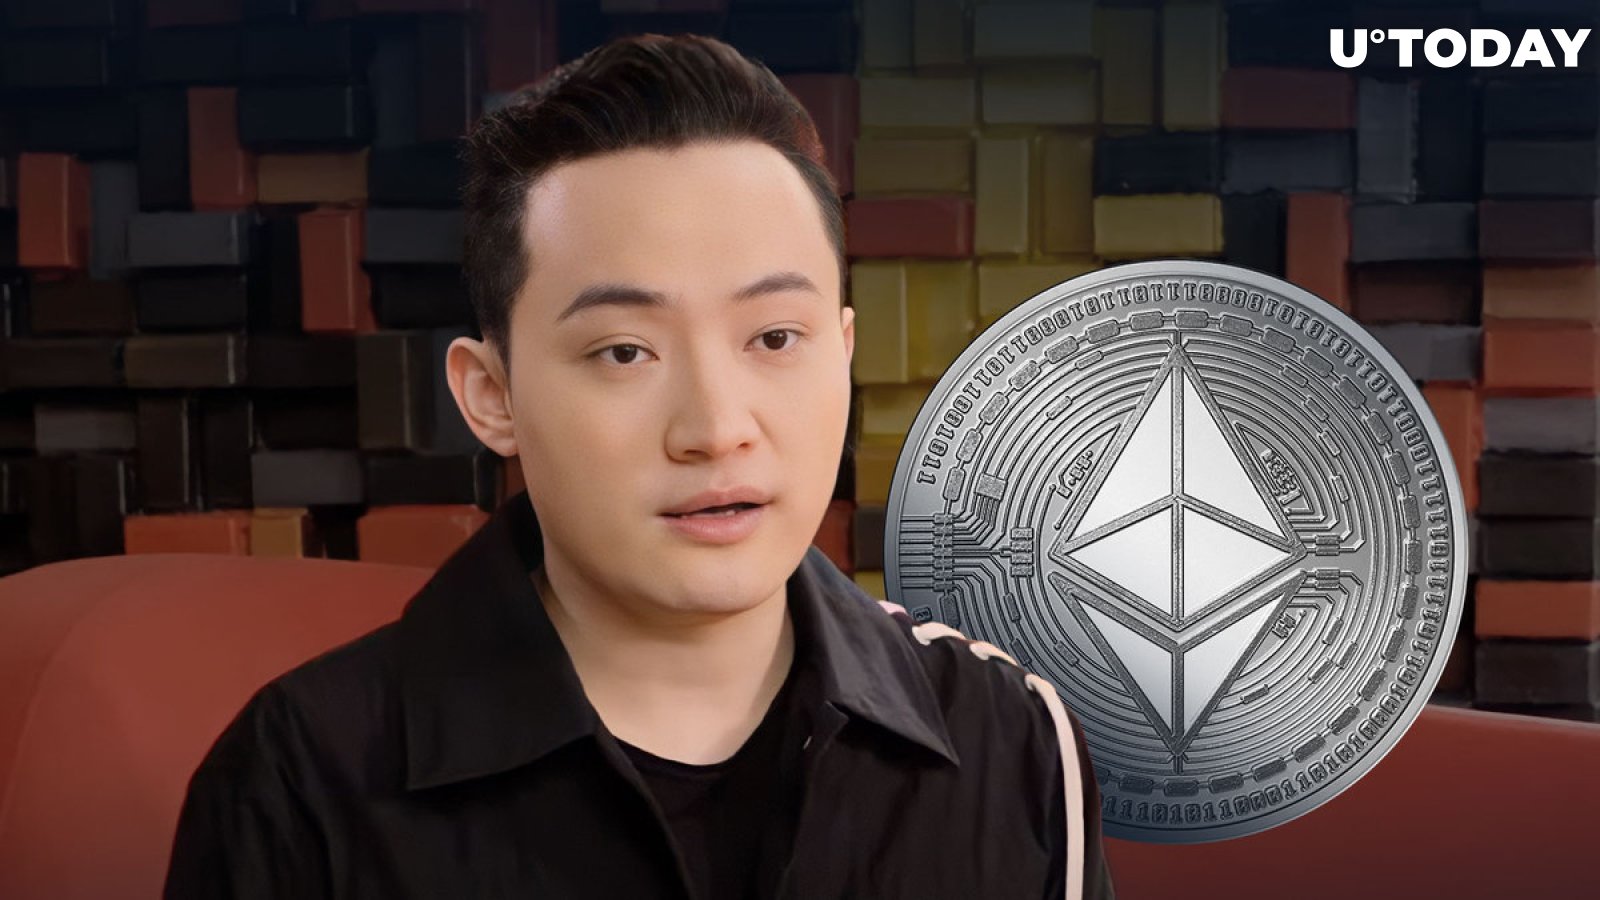 Tron Founder Justin Sun Moves Massive Ethereum On-Chain, Sell-Off Incoming?